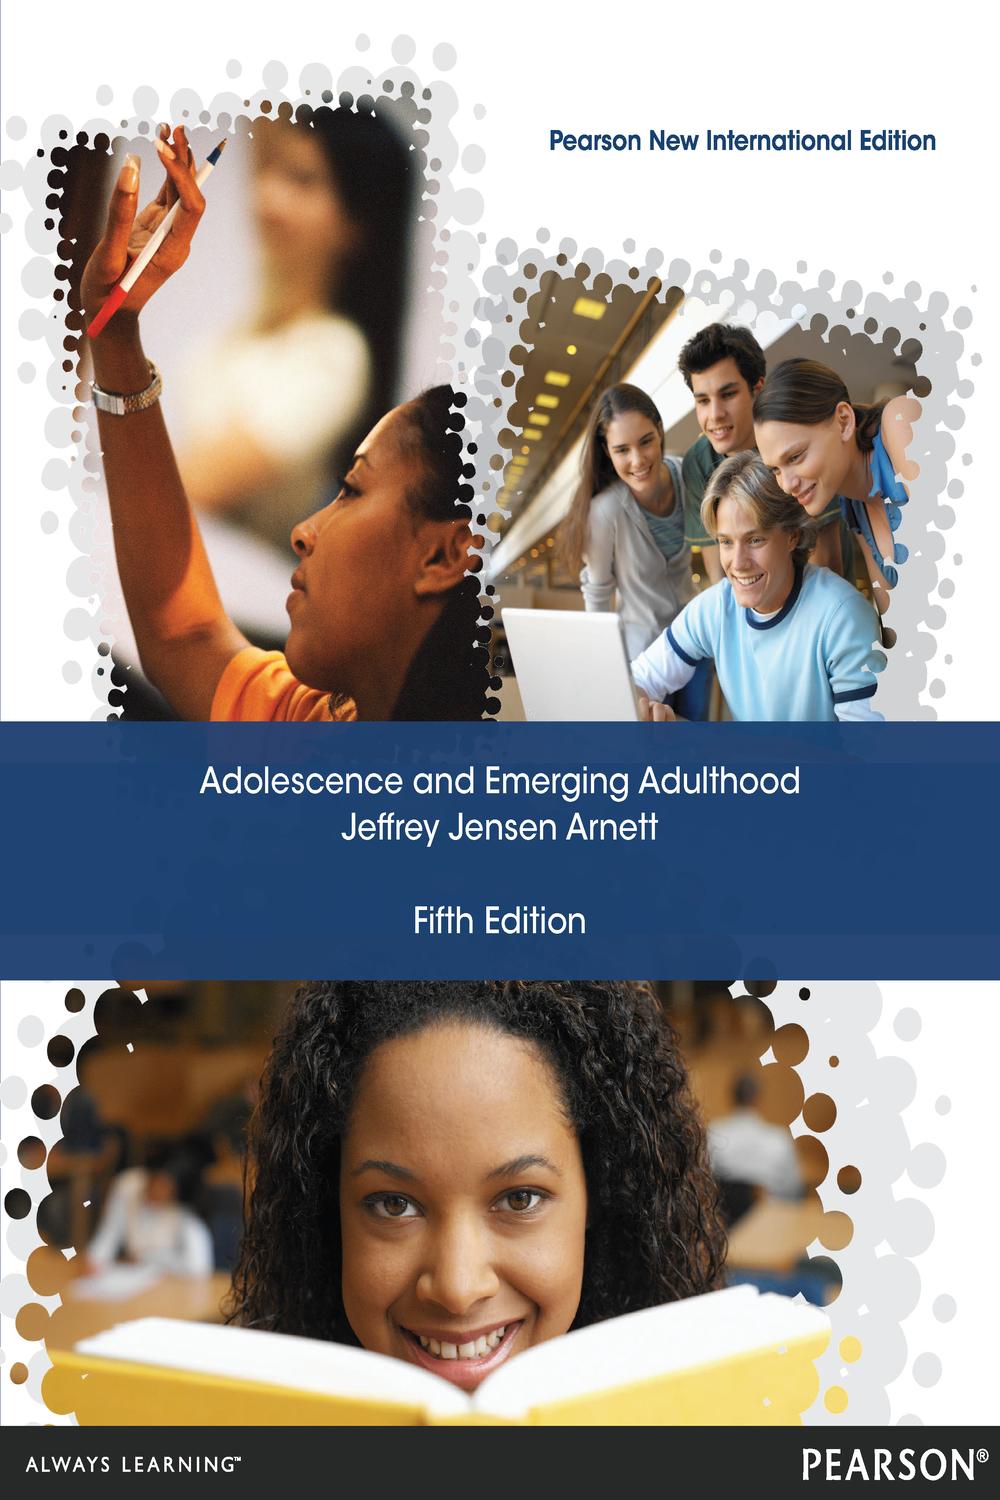 adolescence and emerging adulthood 6th edition pdf download free